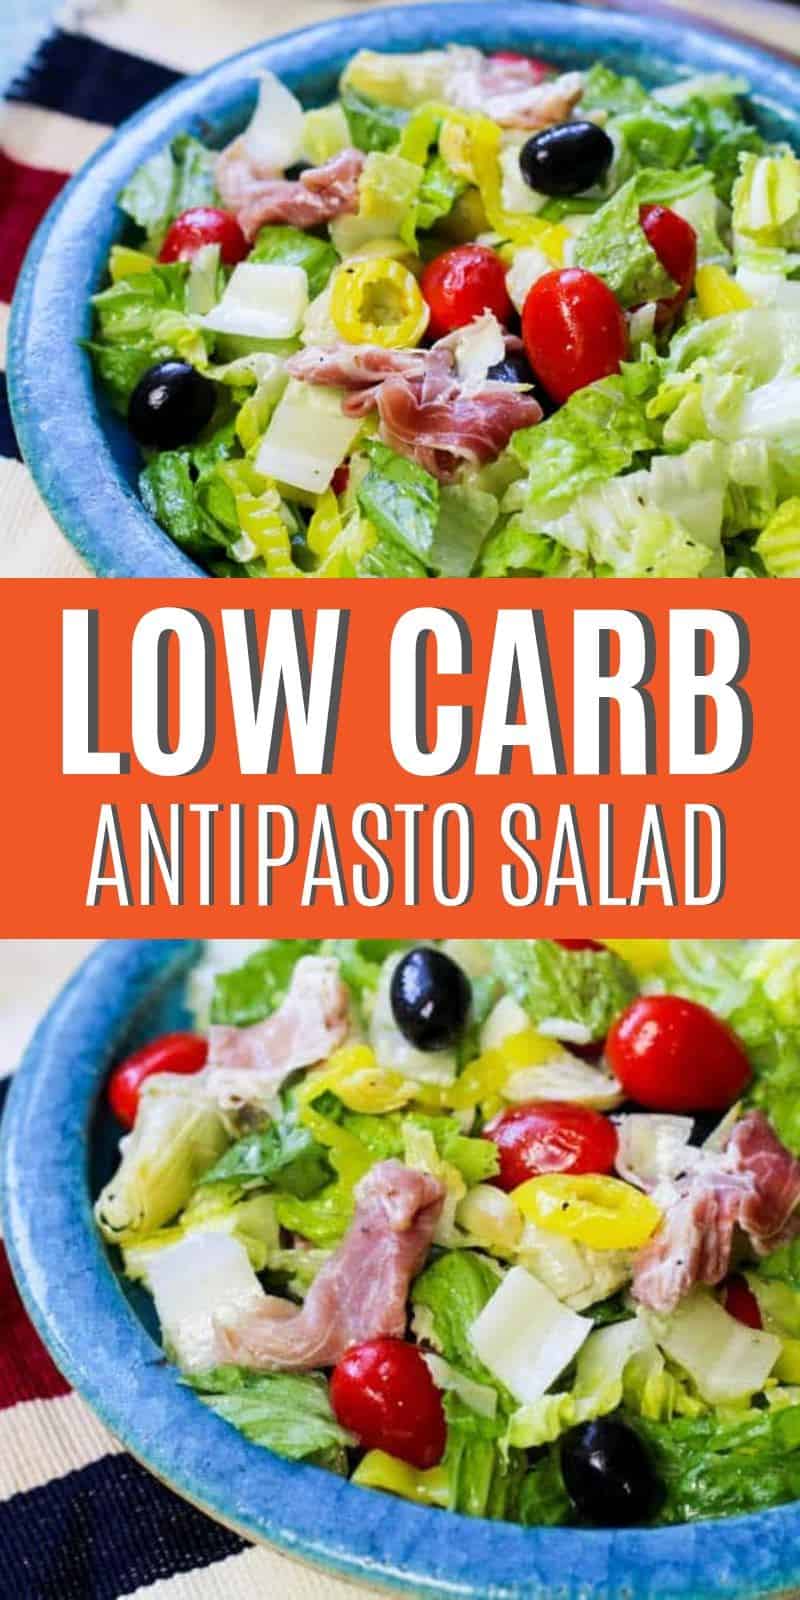 This low carb antipasto salad recipe is so delicious and easy to make! You are going to love it! If you love salads, this new recipe is a special treat for you! 